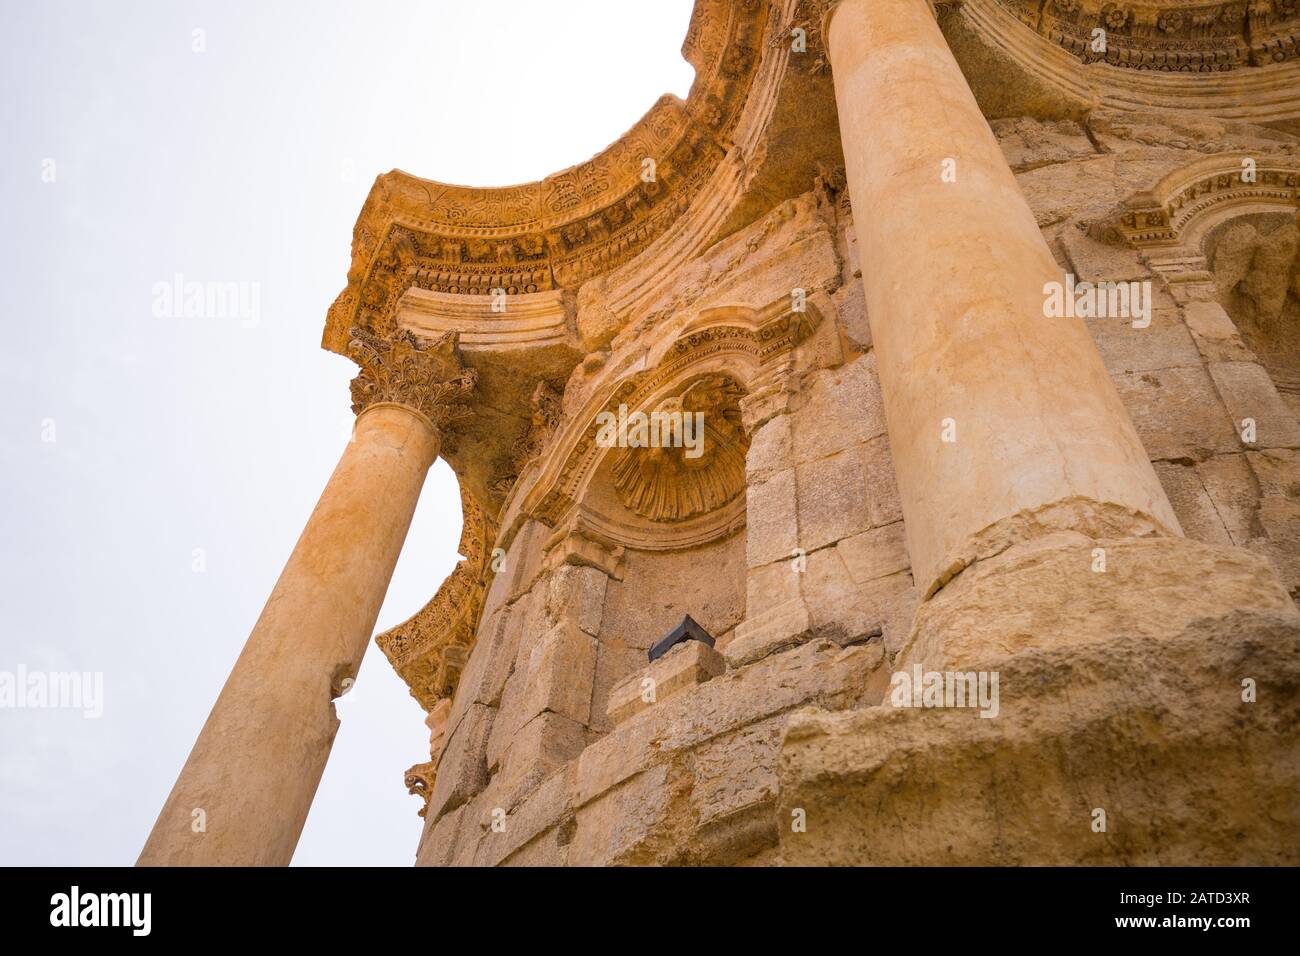 The Temple of Venus. The ruins of the Roman city of Heliopolis or Baalbek in the Beqaa Valley. Baalbek, Lebanon - June, 2019 Stock Photo